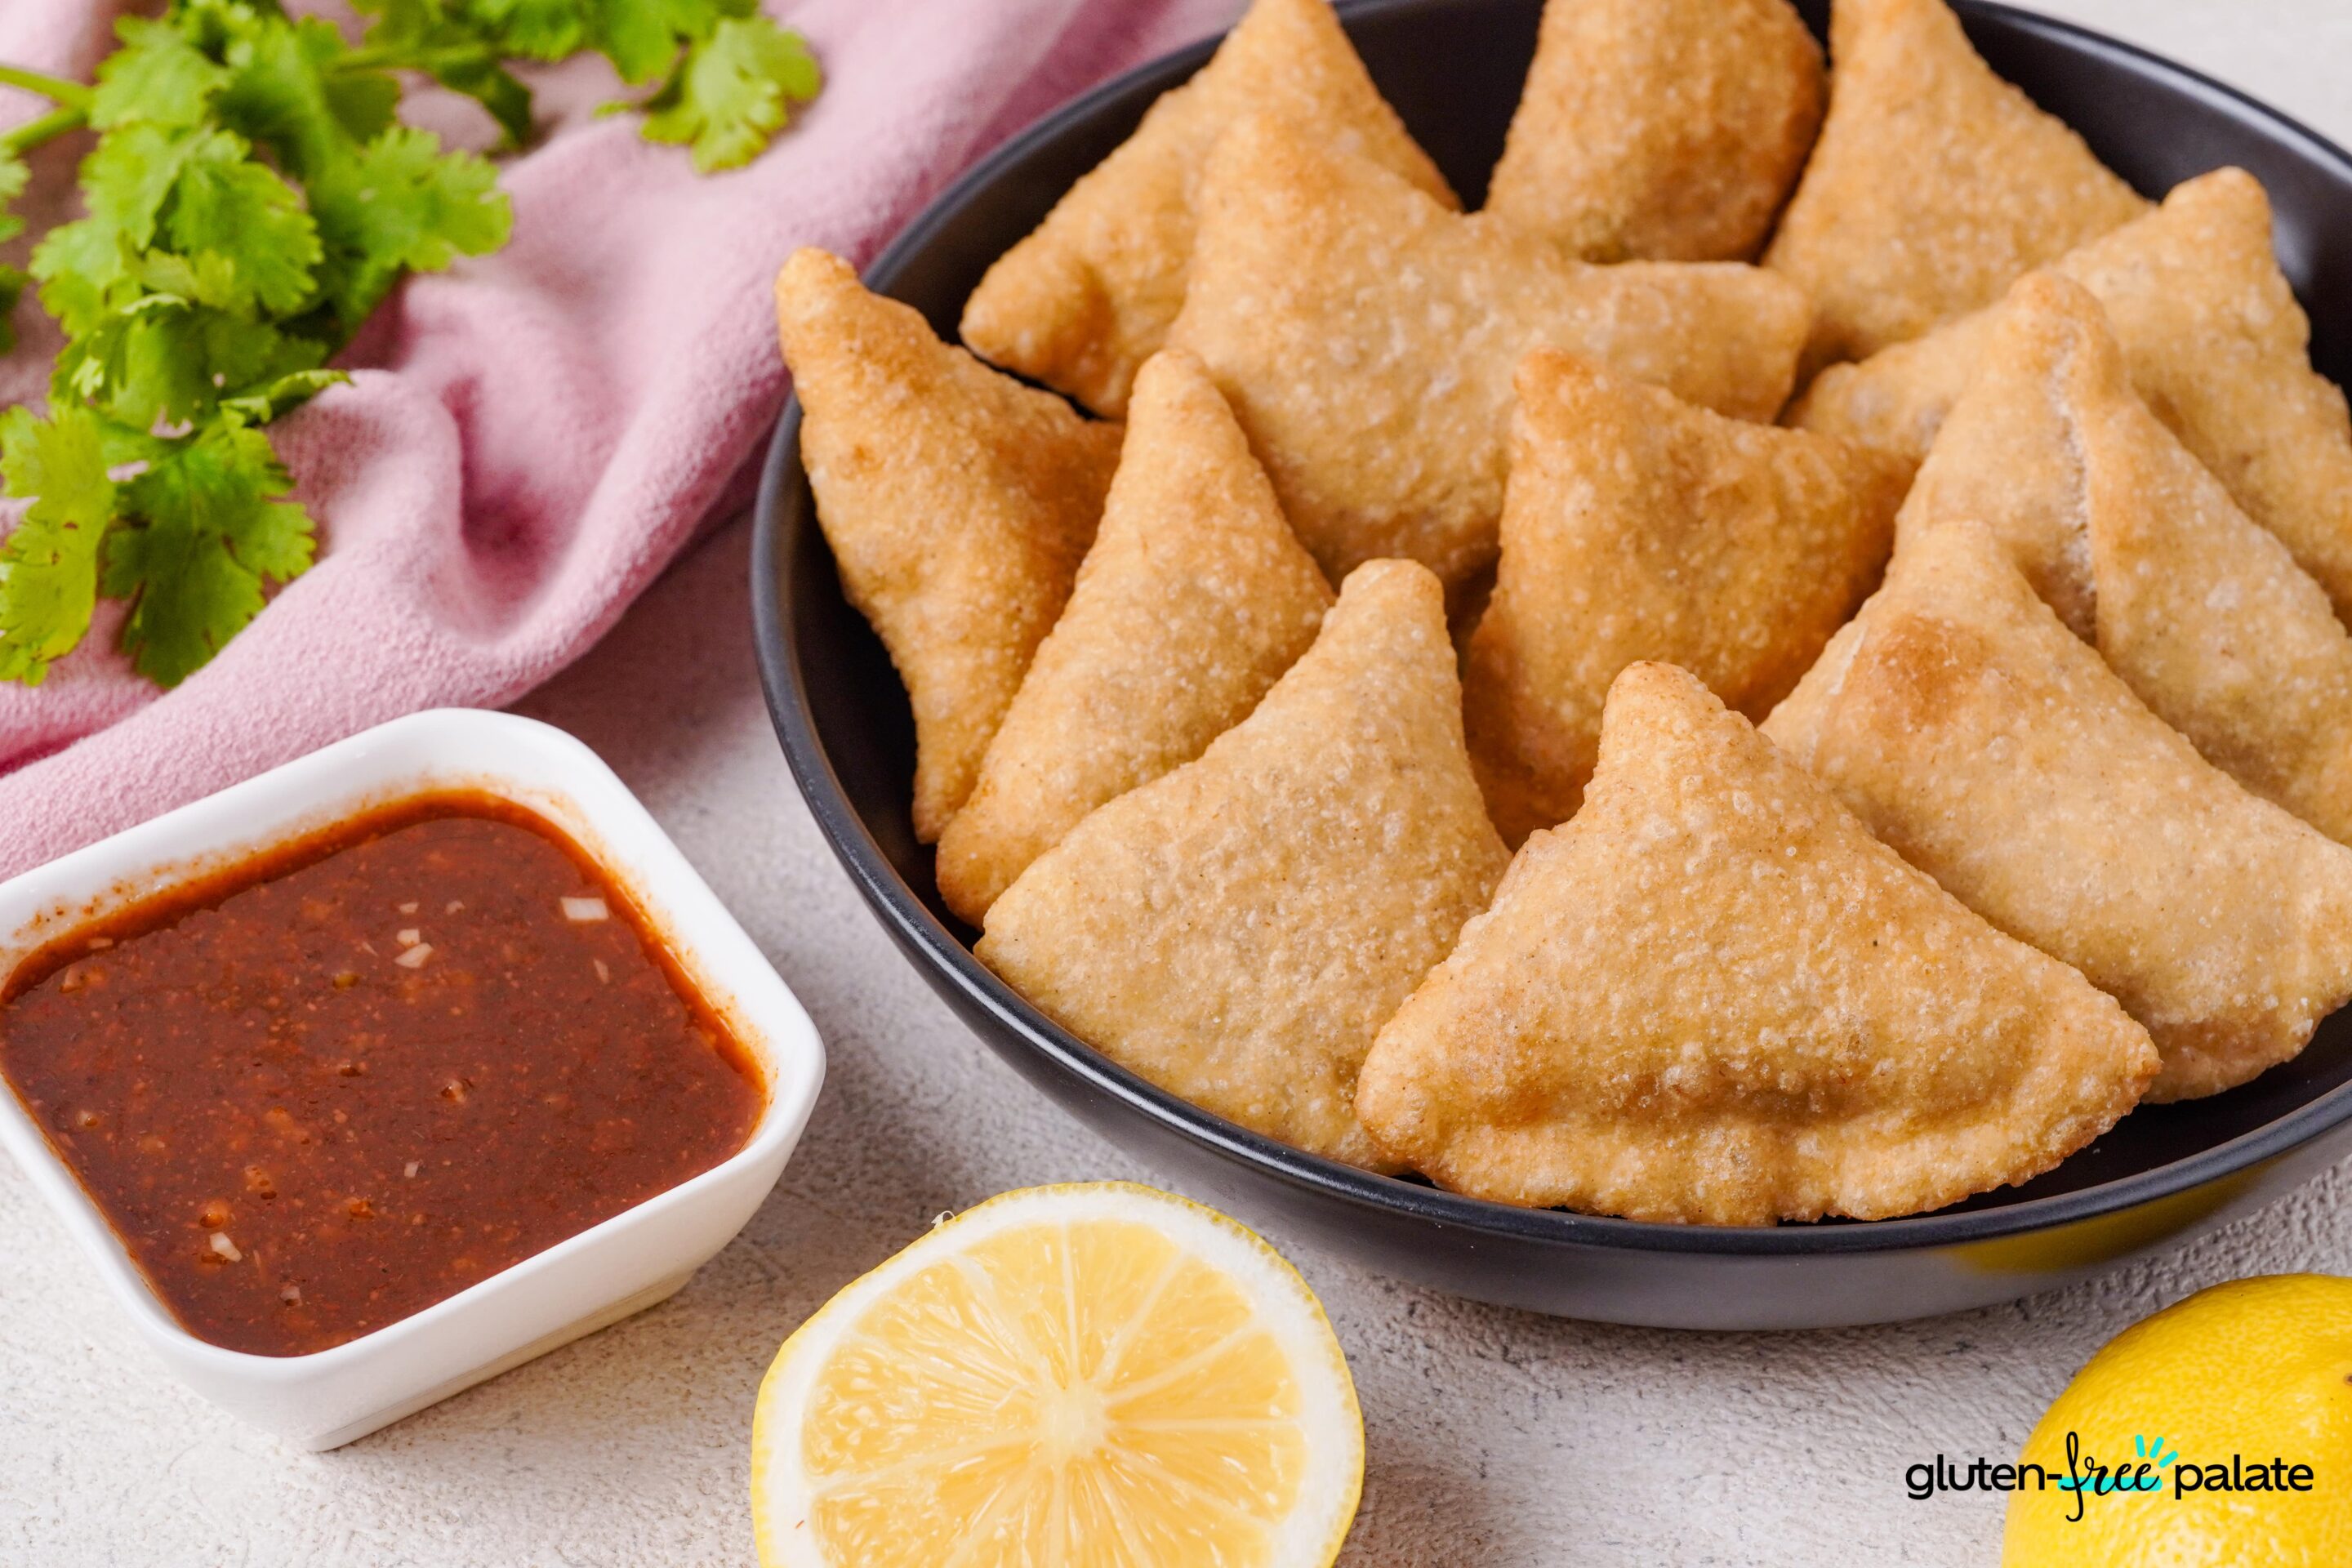 Gluten-free samosas in a black plate with sauce.